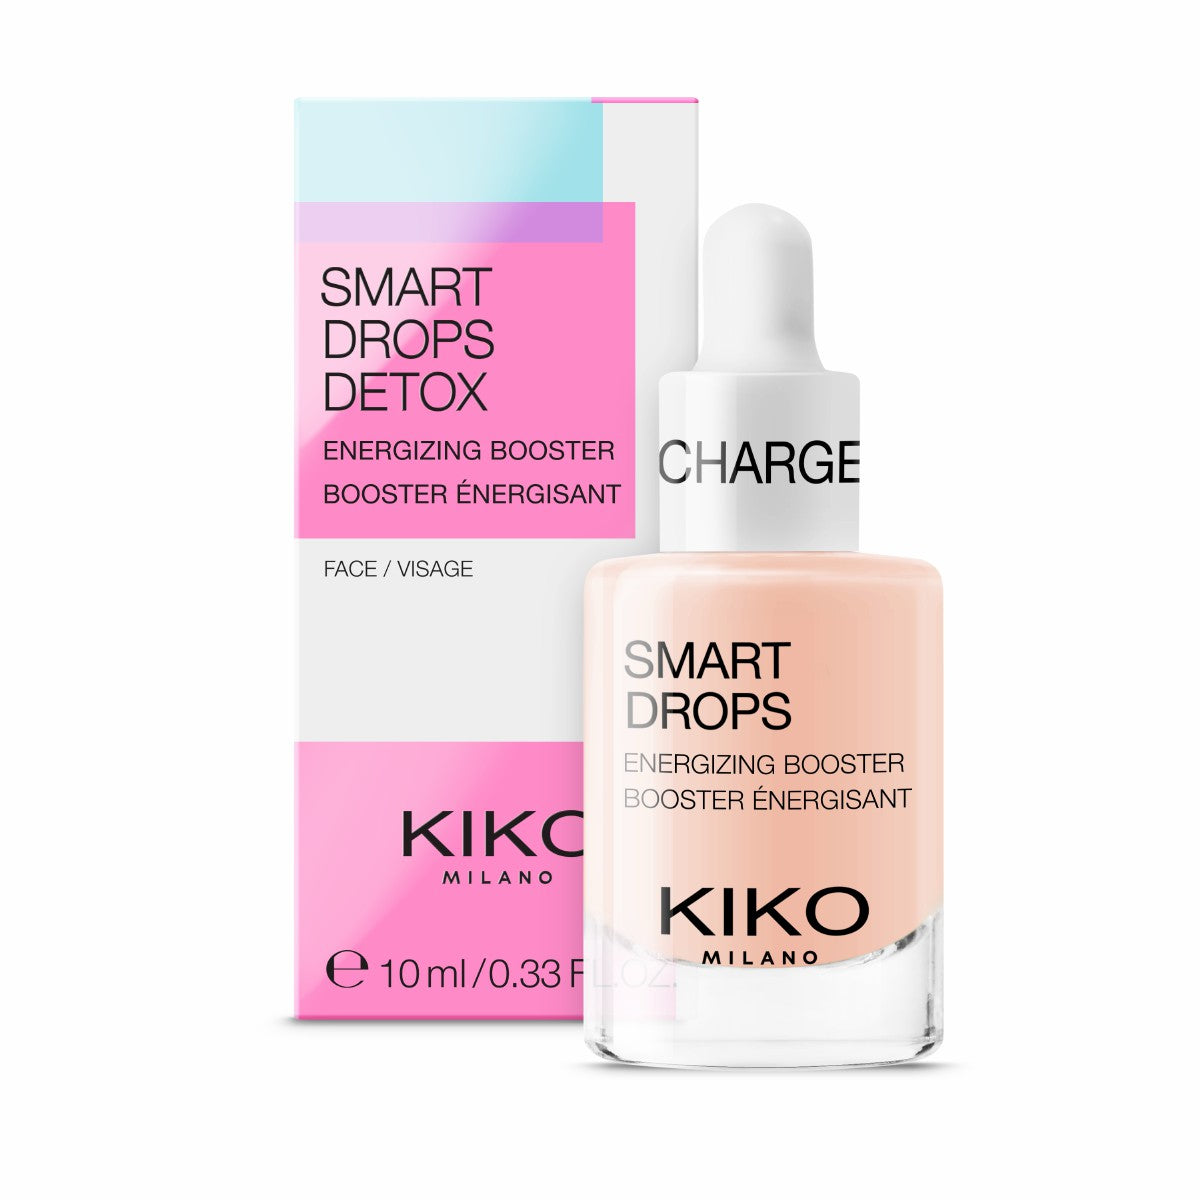 SMART DROP ENERGIZING BOOSTER